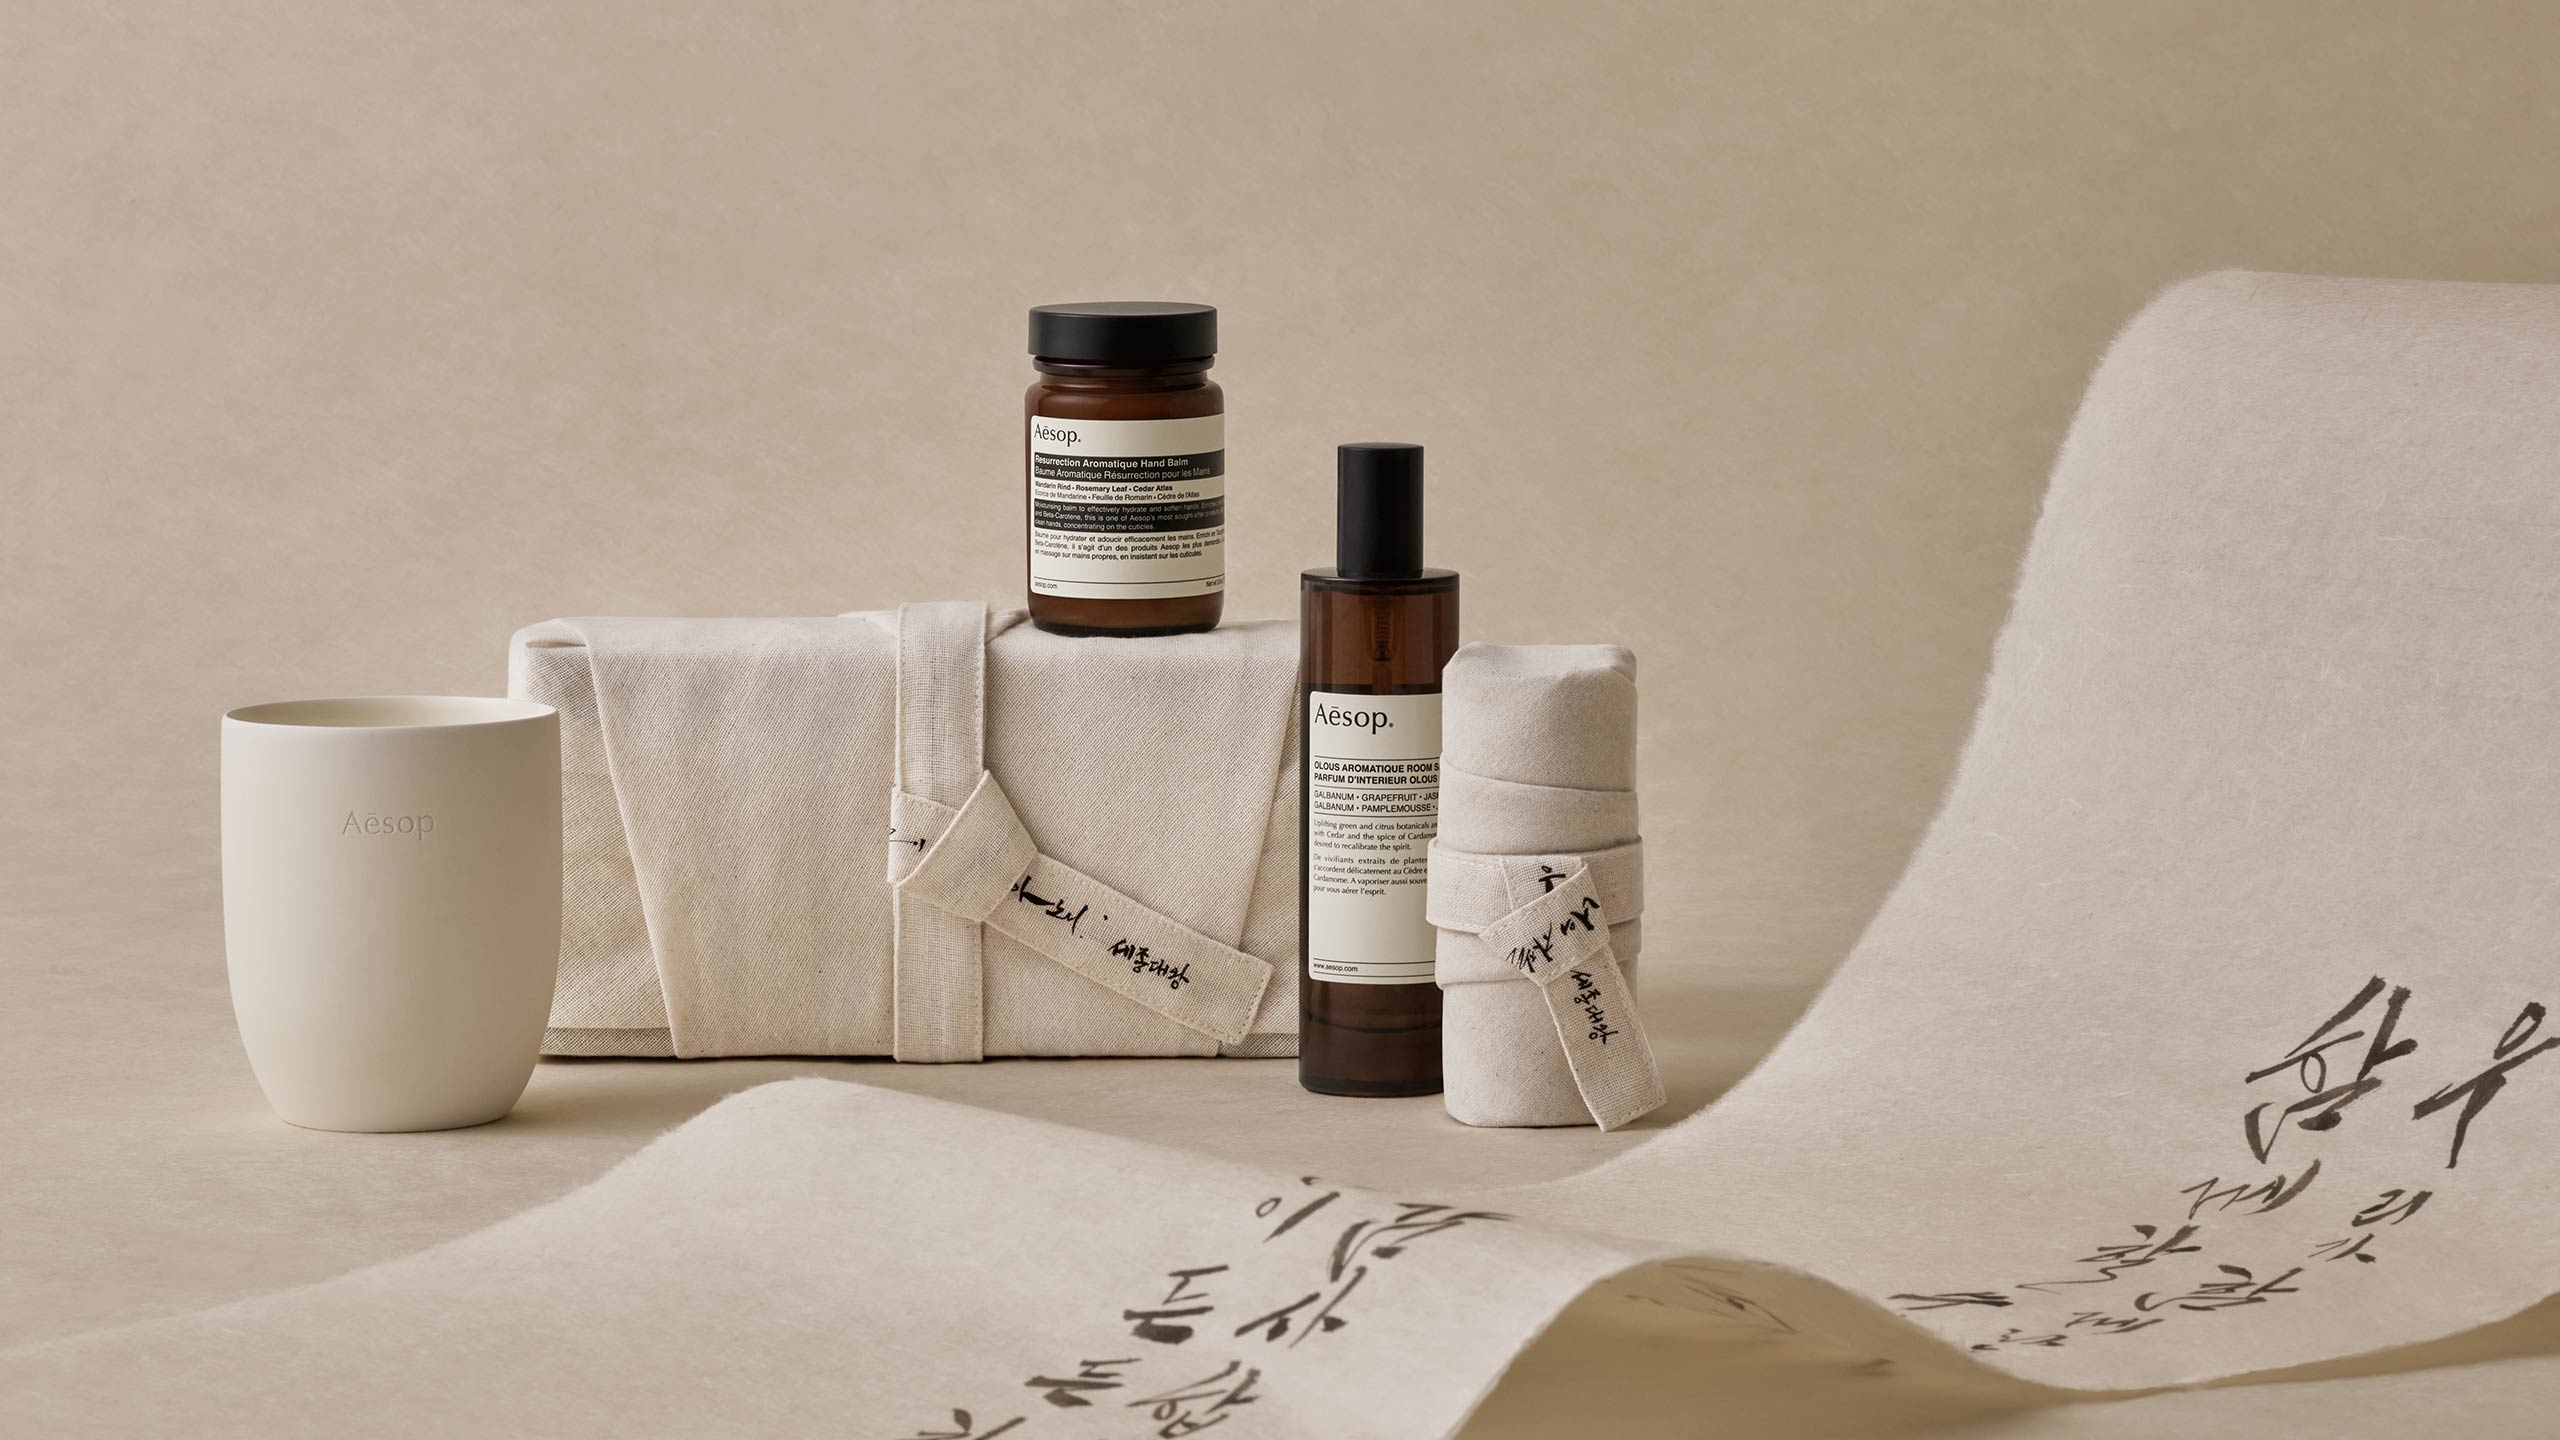 Aesop products placed next to a calligraphy 